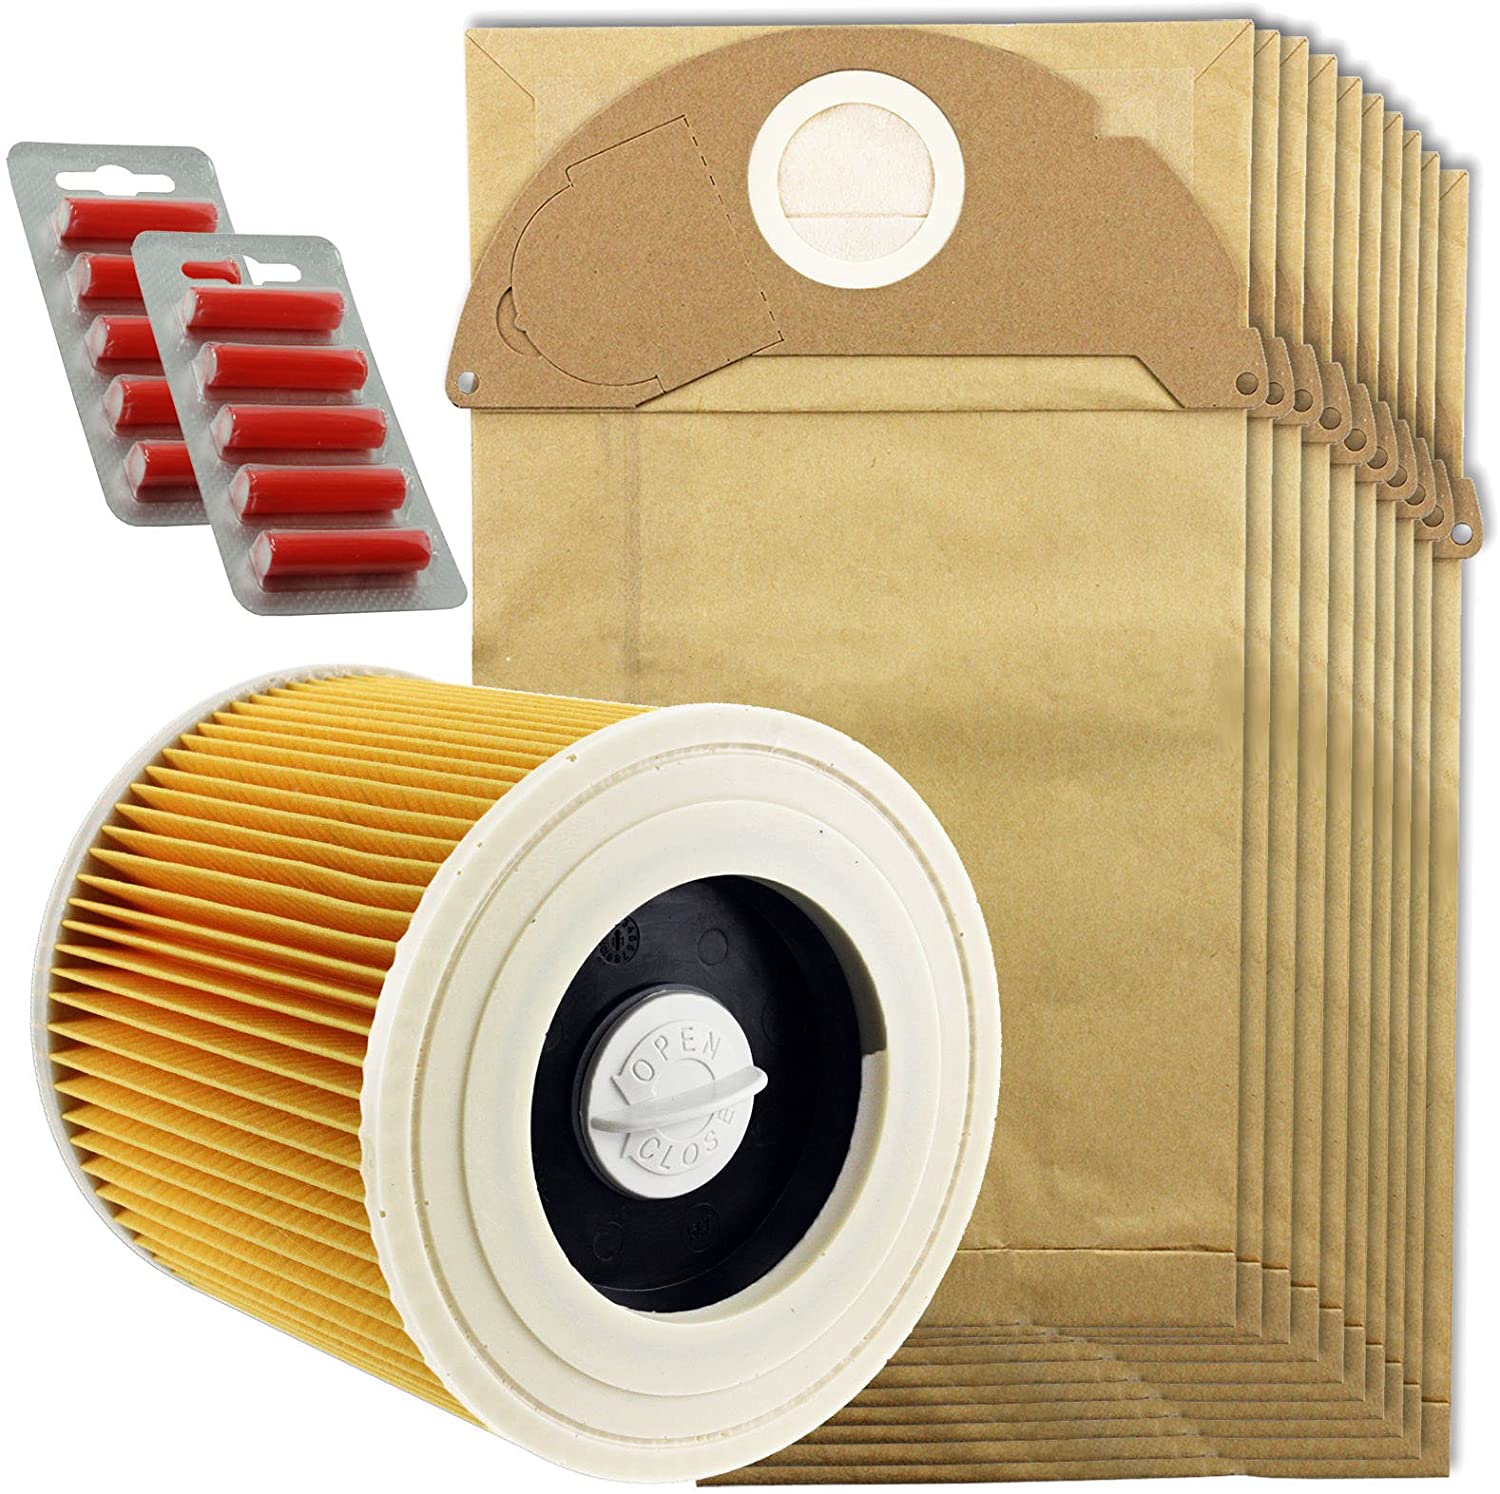 10 x Wet & Dry Vacuum Cleaner Dust Bags & Hoover Filter For KARCHER A2003 WD2250 + Fresheners